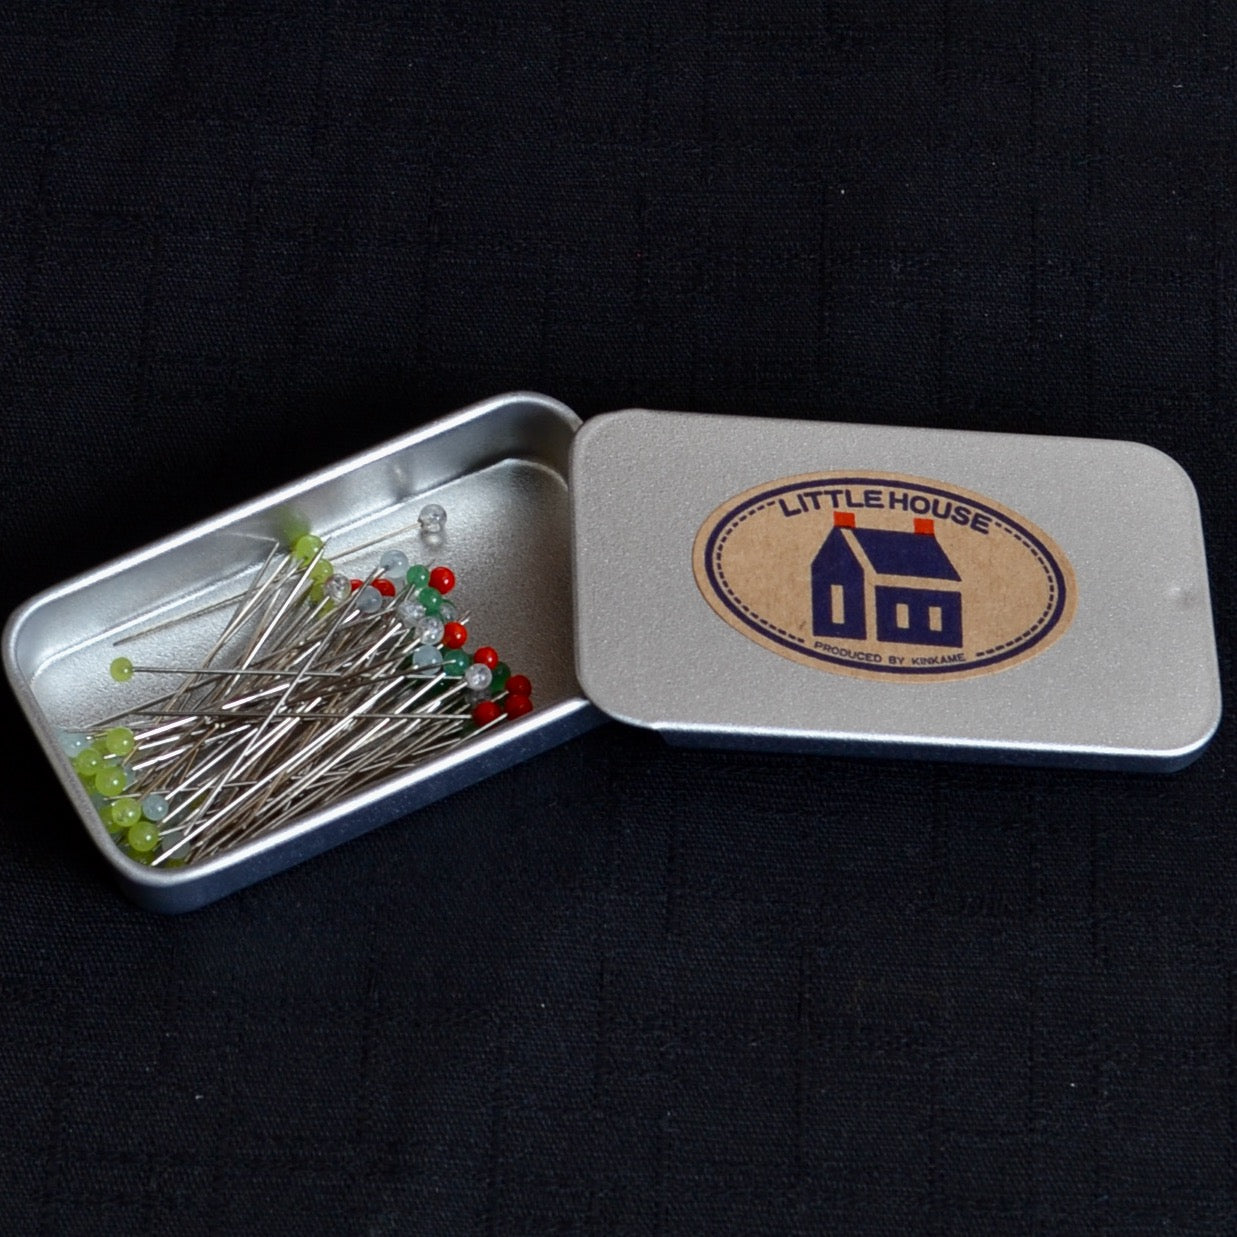 Tombo-dama Sewing Pins - A Threaded Needle